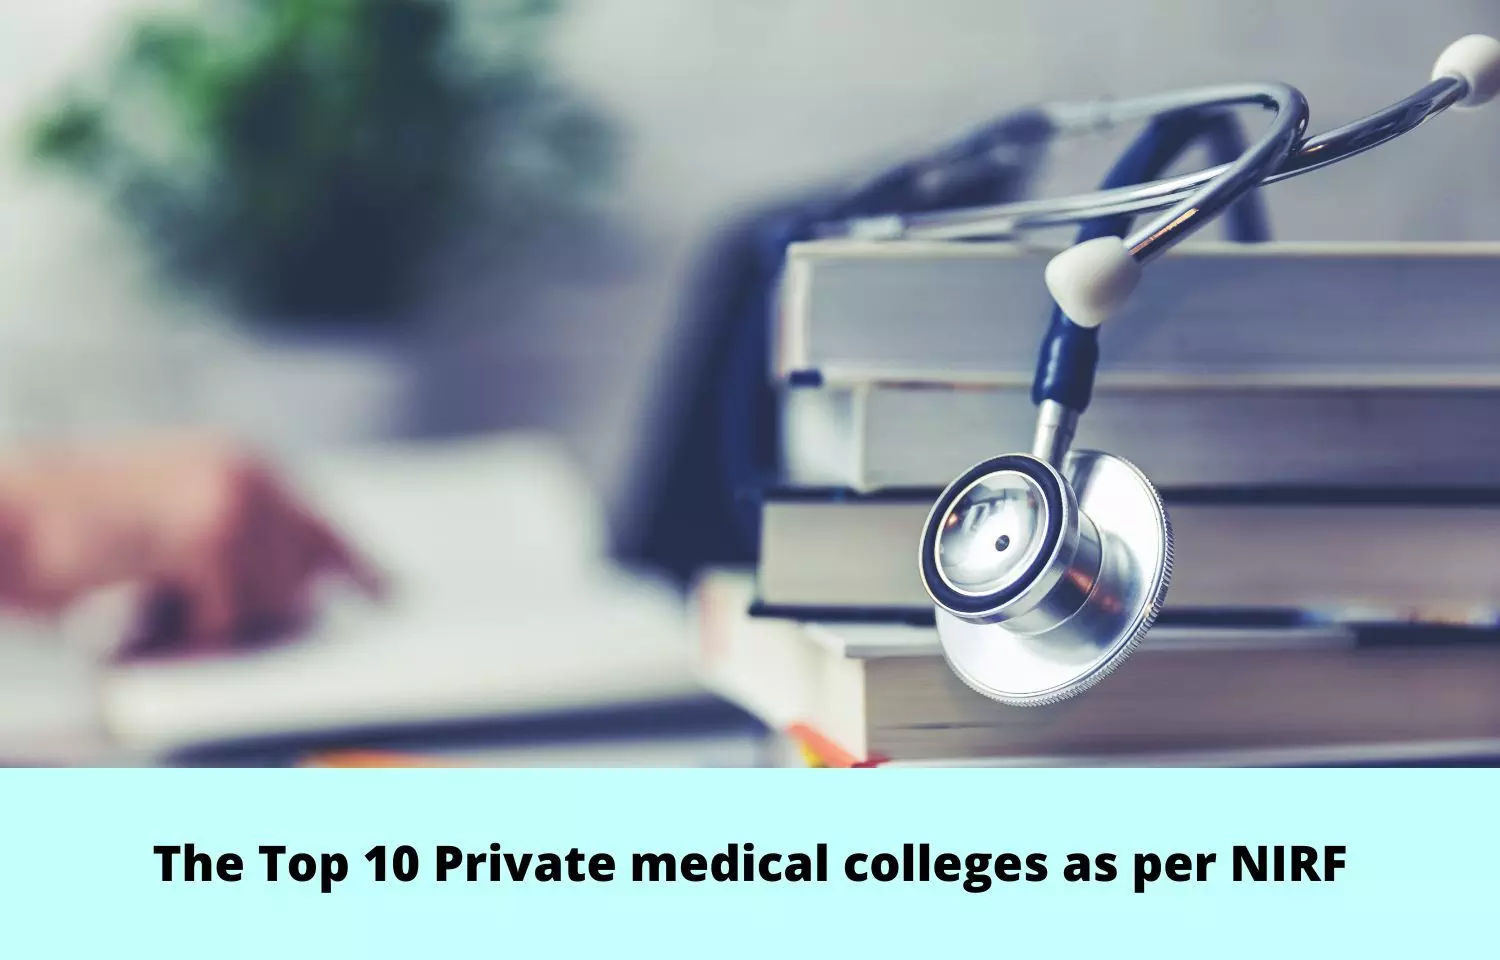 Planning for MBBS in 2022: Check out Top 10 Private Medical Colleges as per NIRF